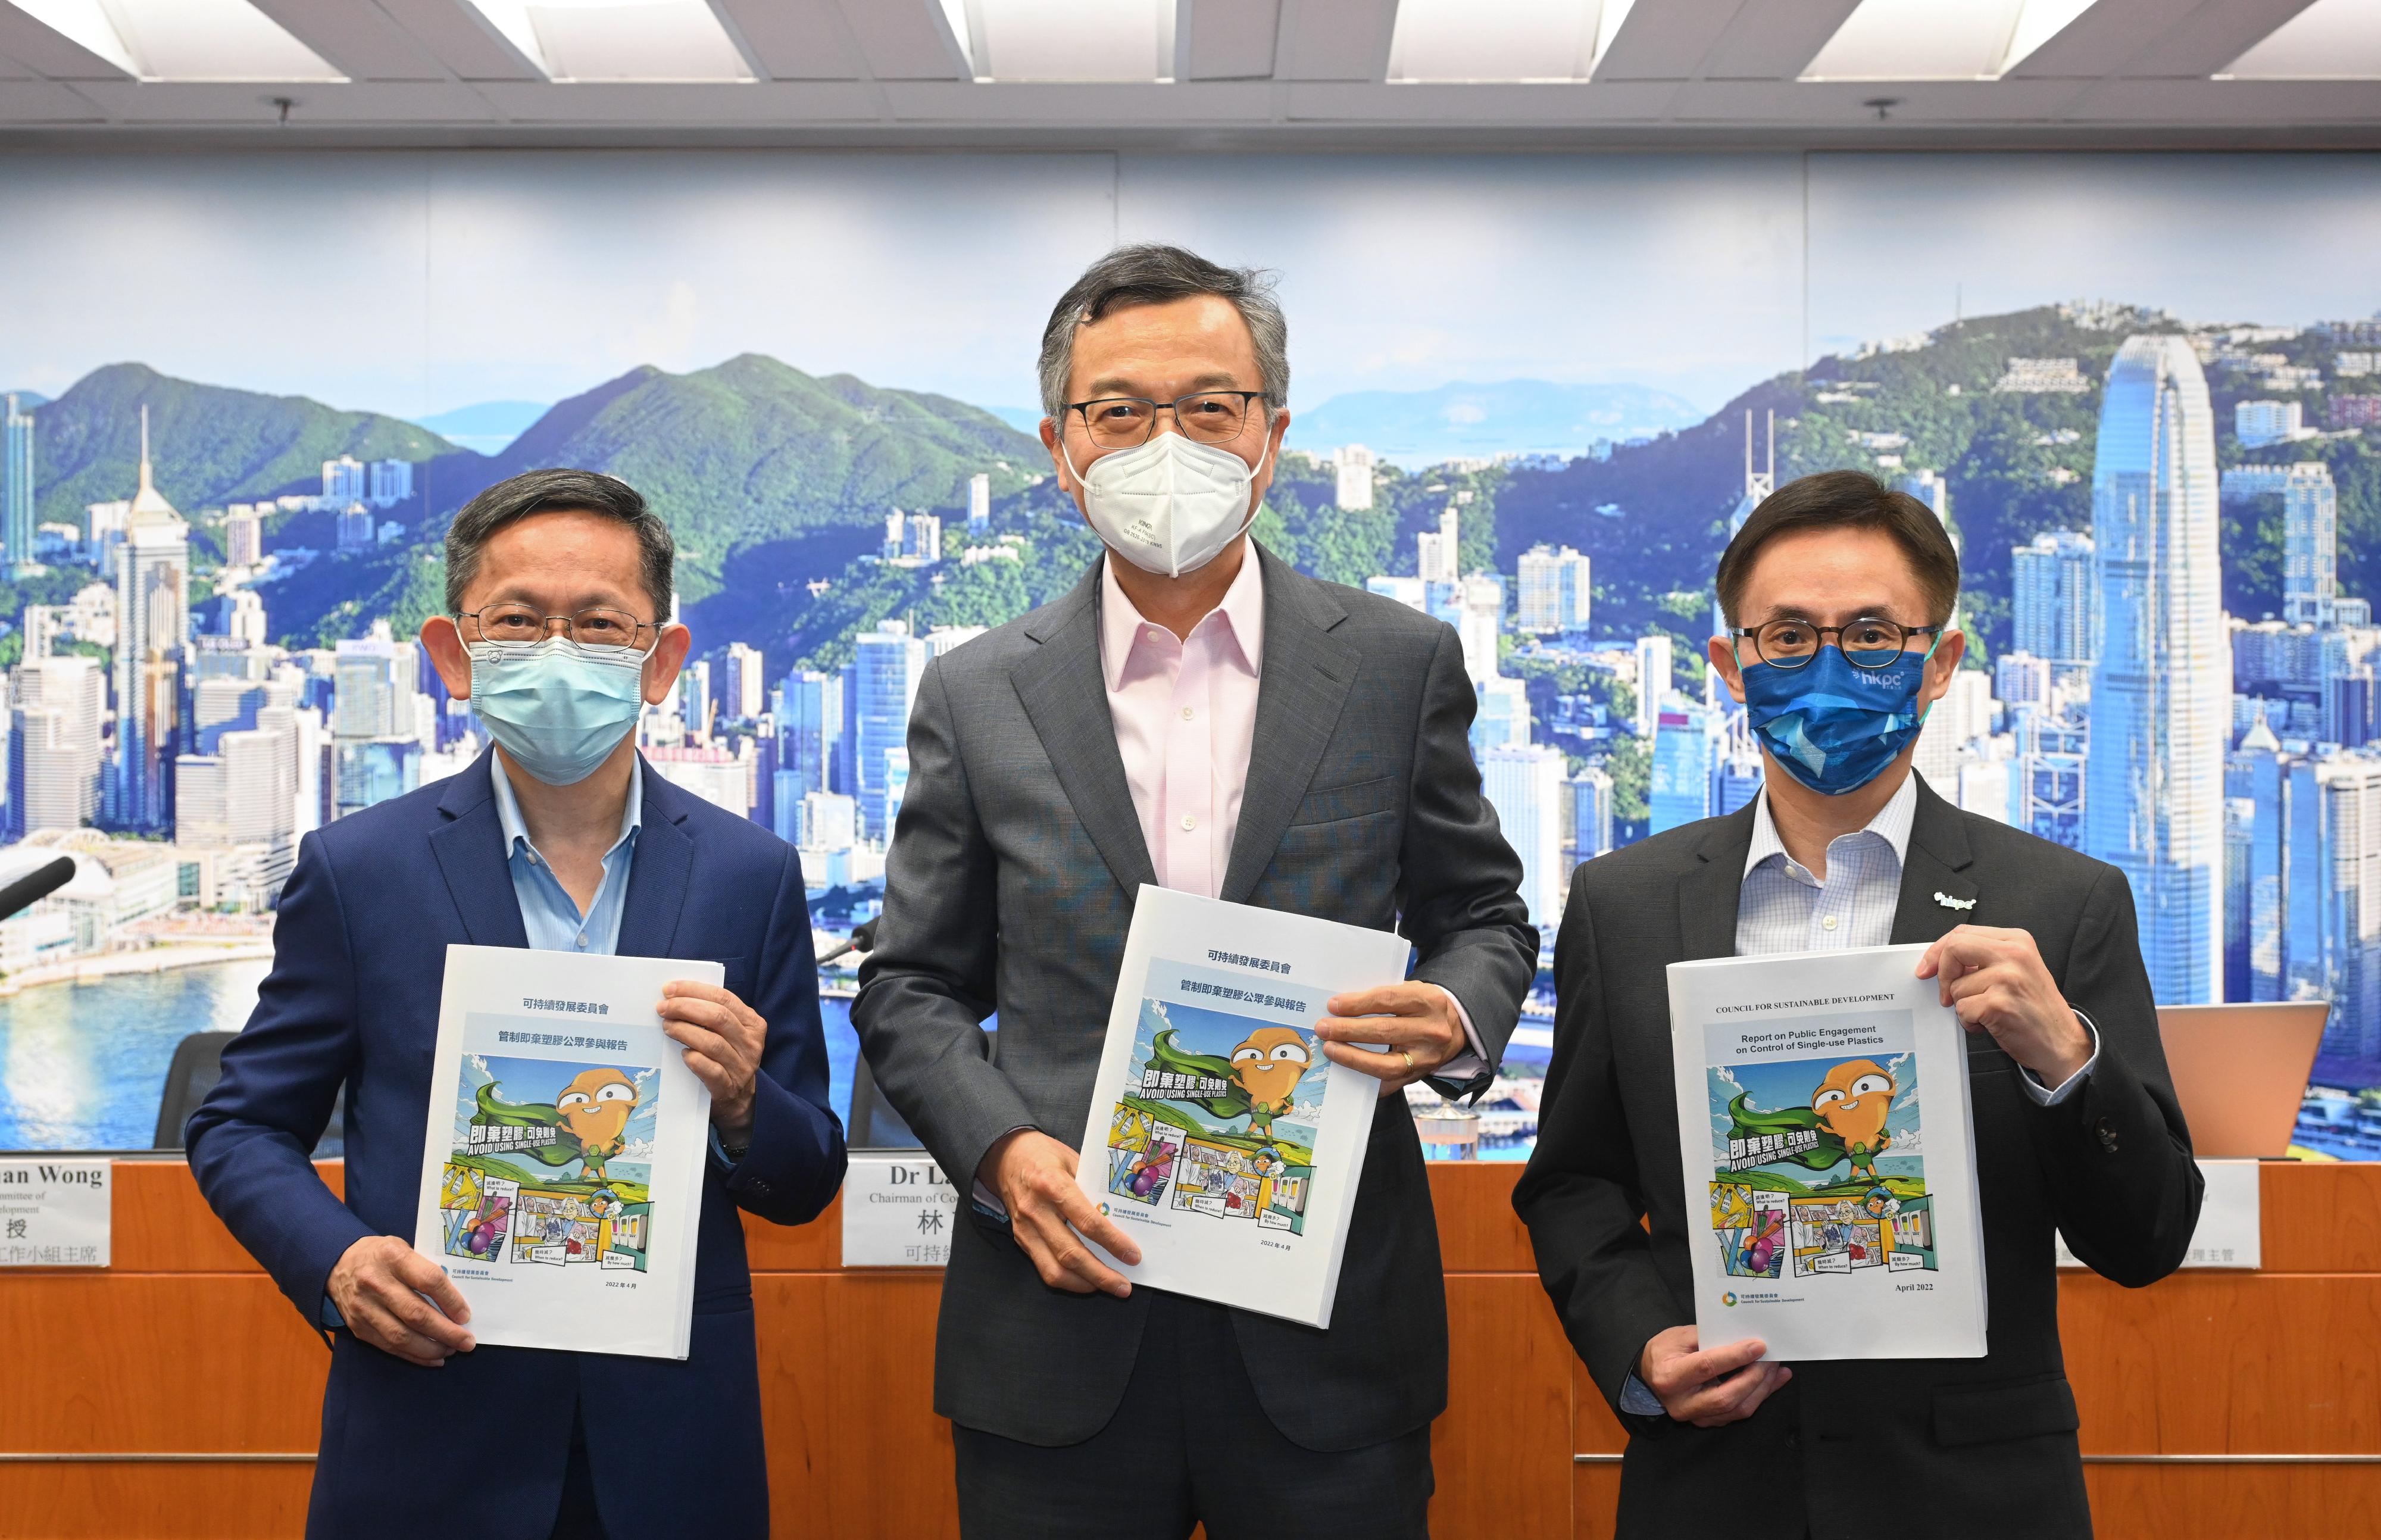 The Council for Sustainable Development held a press conference today (April 14) to announce the report on the public engagement exercise on control of single-use plastics. The Chairman of the Council, Dr Lam Ching-choi (centre); the Chairman of the Council's Strategy Sub-committee, Professor Jonathan Wong (left); and the Head of Carbon and Environmental Excellence of the Hong Kong Productivity Council, Mr Kenny Wong (right), are pictured at the press conference.